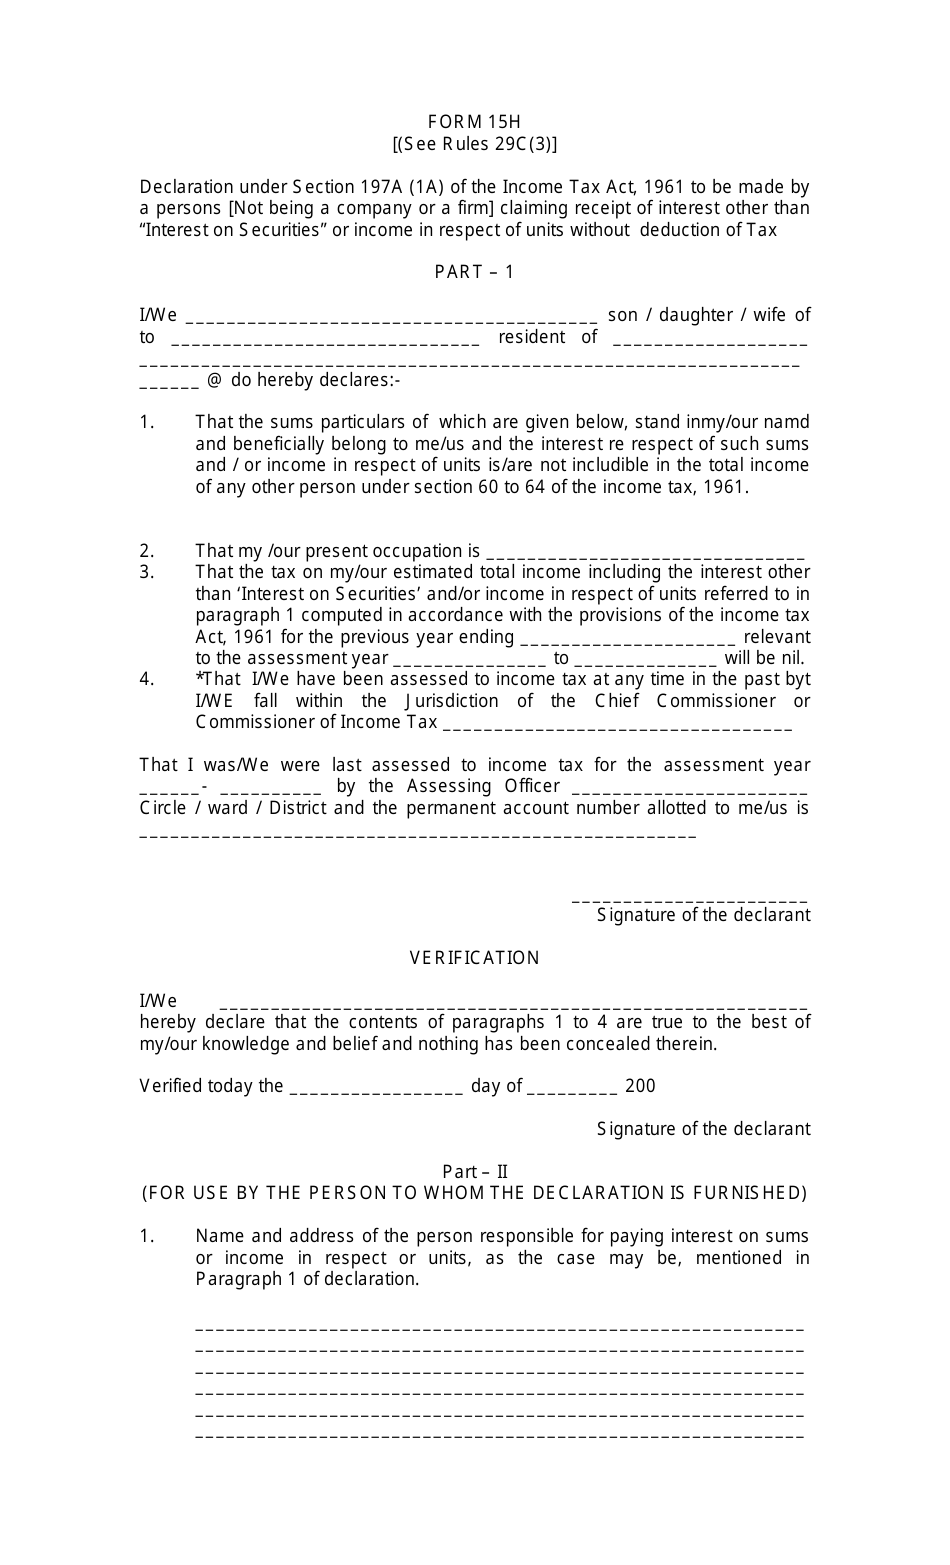 Form 15H Declaration Under Section 197a (1a) of the Income Tax Act, 1961 to Be Made by a Persons [not Being a Company or a Firm] Claiming Receipt of Interest Other Than interest on Securities or Income in Respect of Units Without Deduction of Tax - India, Page 1